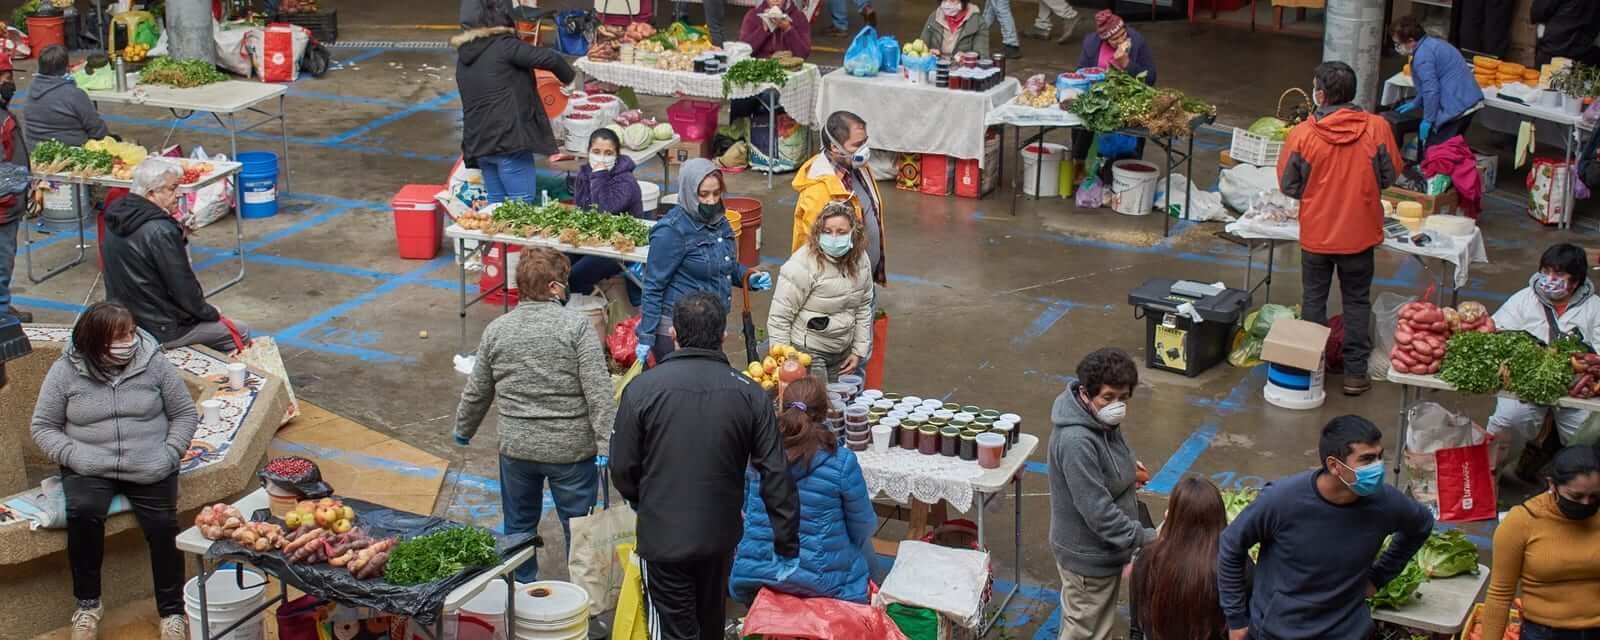 chile-market-during-pandemic